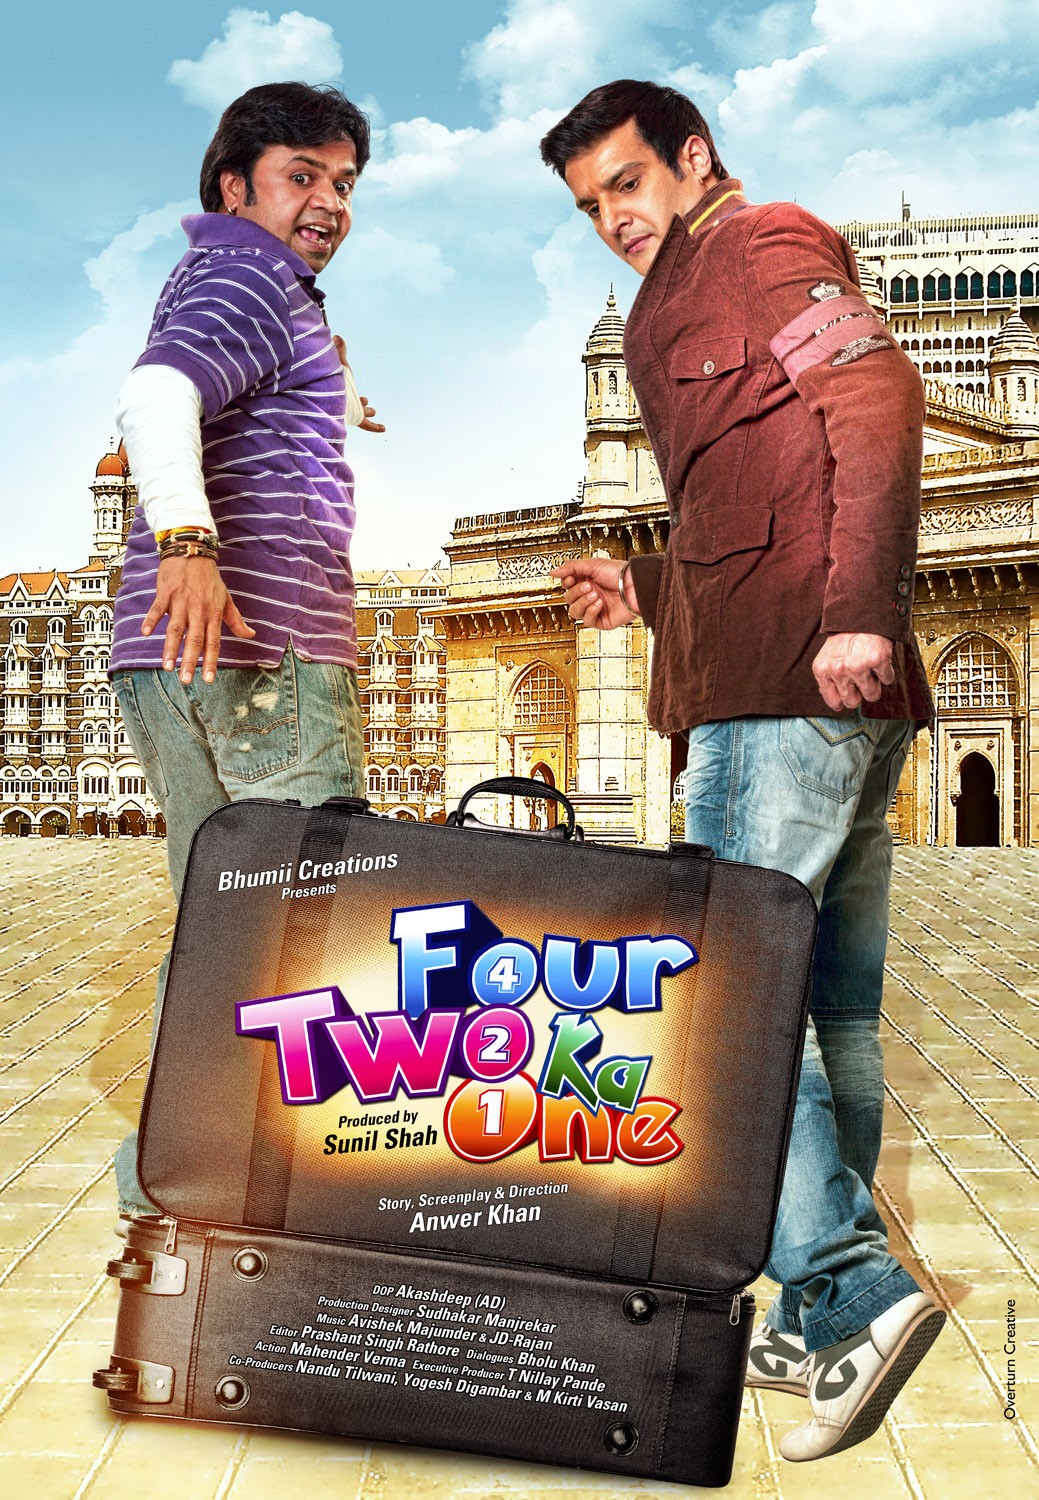 Extra Large Movie Poster Image for Four Two Ka One (#9 of 10)